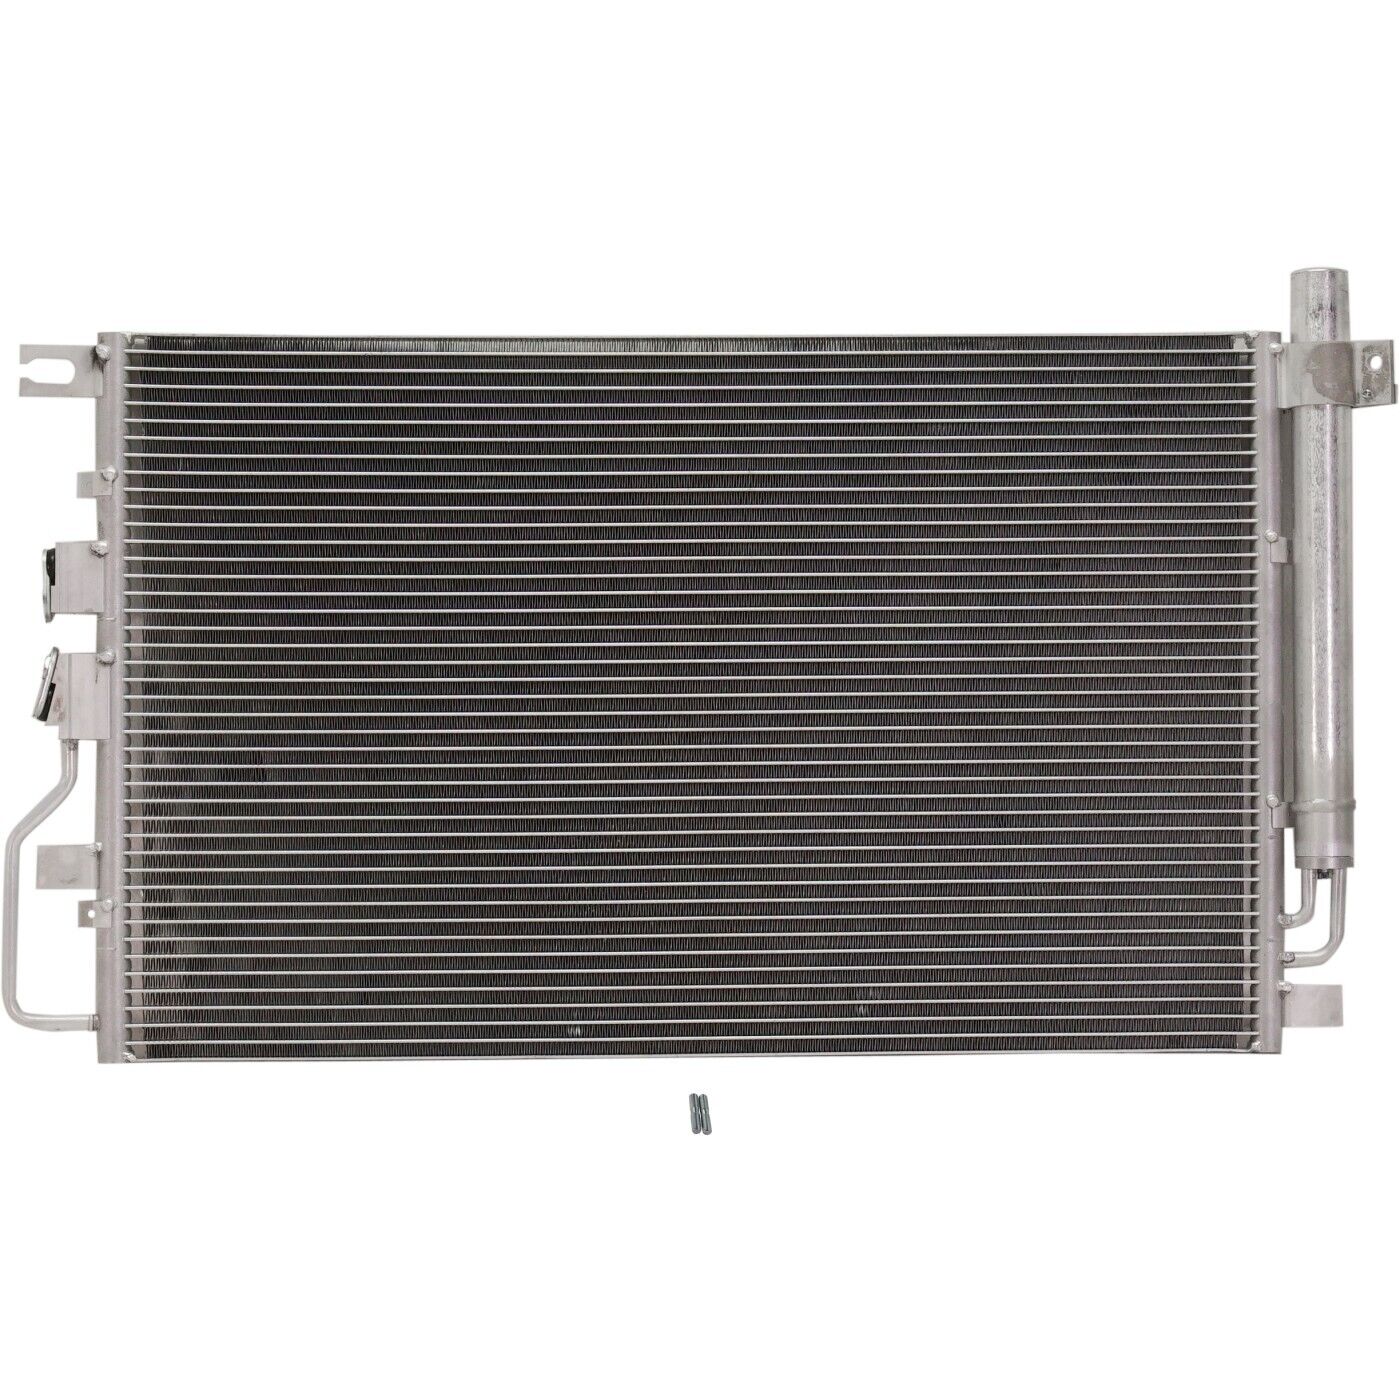 A/C Condenser For 2008-2017 Chevrolet Equinox With Receiver Drier Aluminum Core